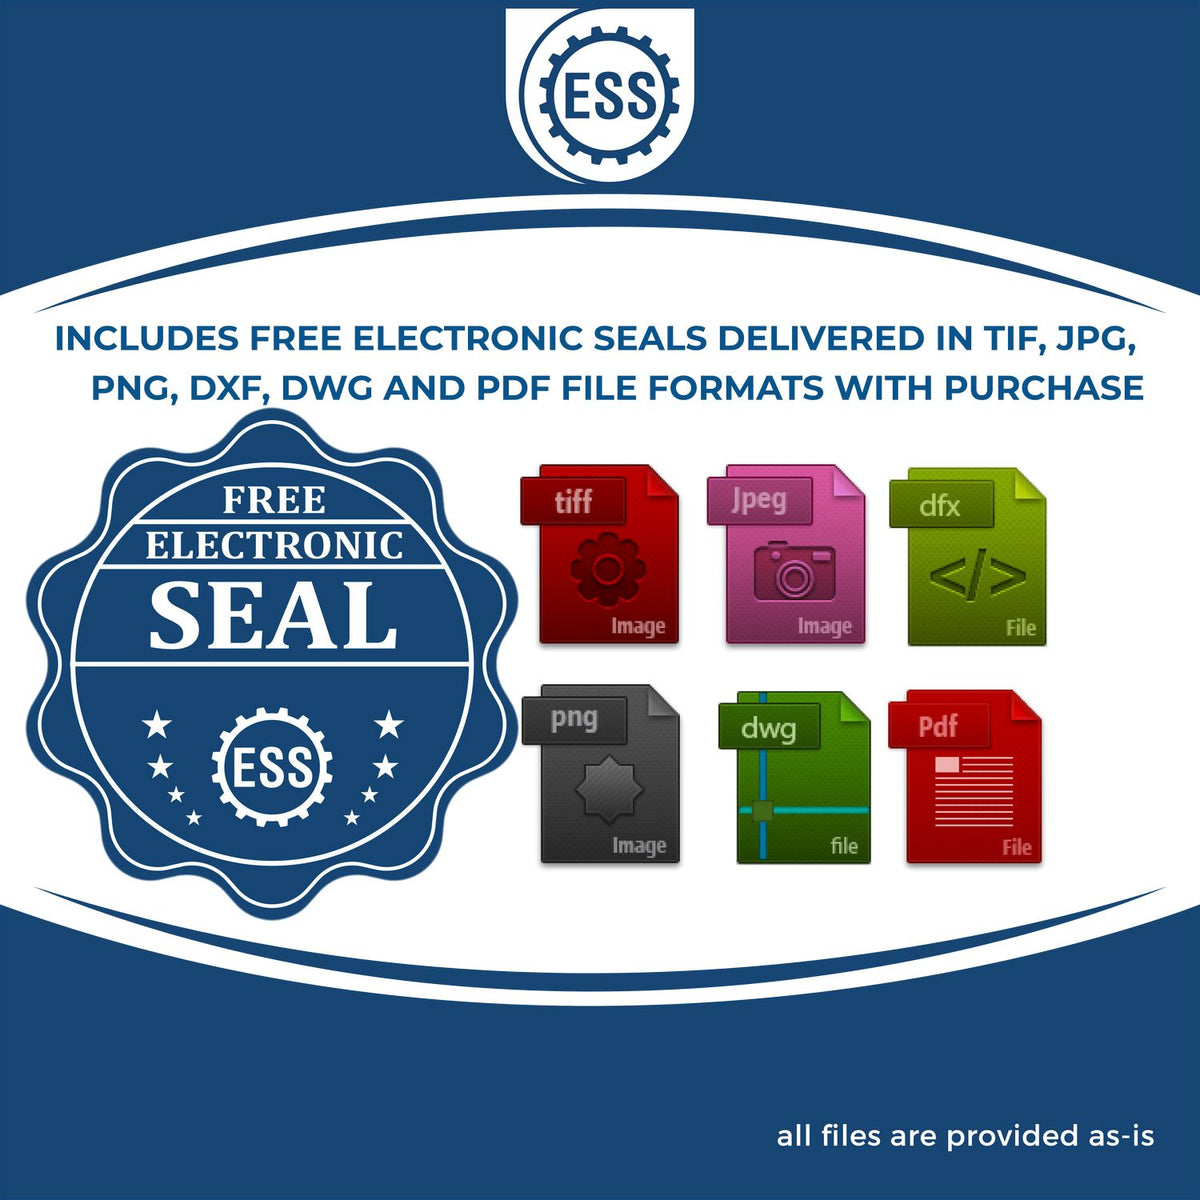 An infographic for the free electronic seal for the Gift Mississippi Architect Seal illustrating the different file type icons such as DXF, DWG, TIF, JPG and PNG.